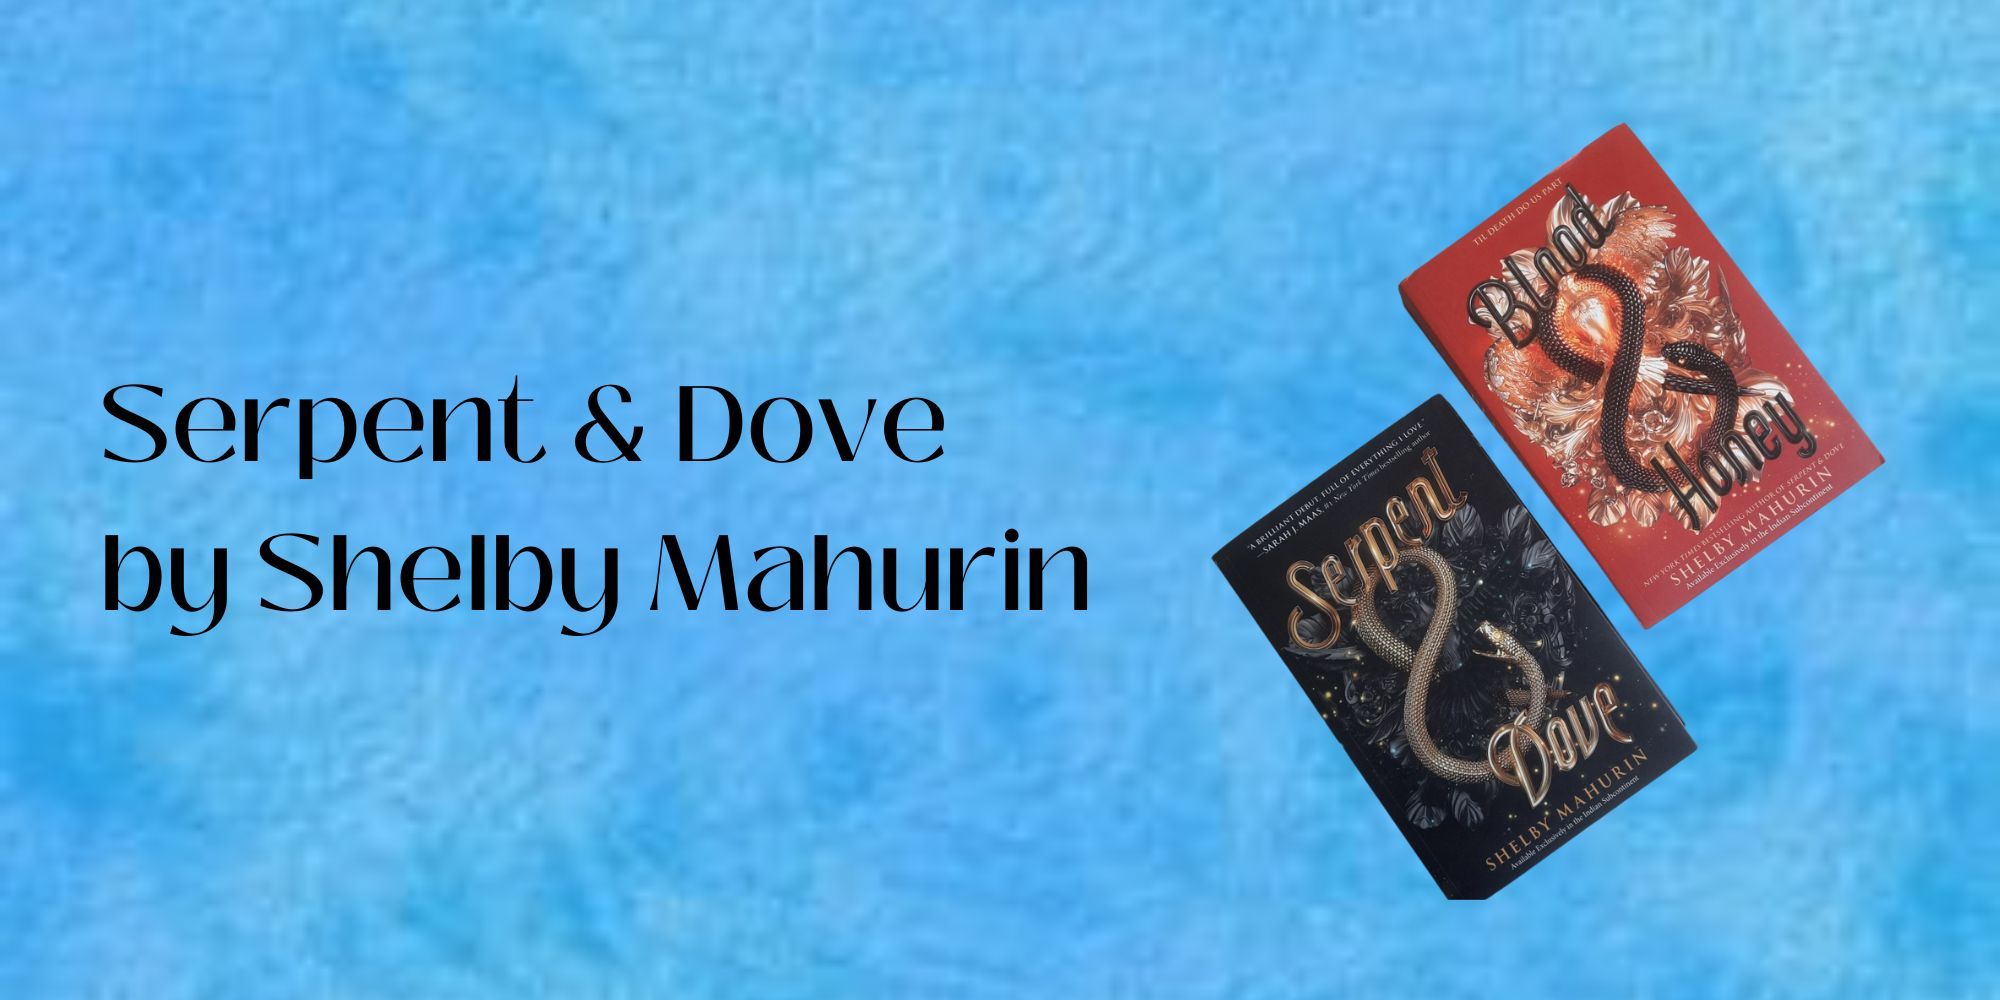 Serpent & Dove Series by Shelby Mahurin